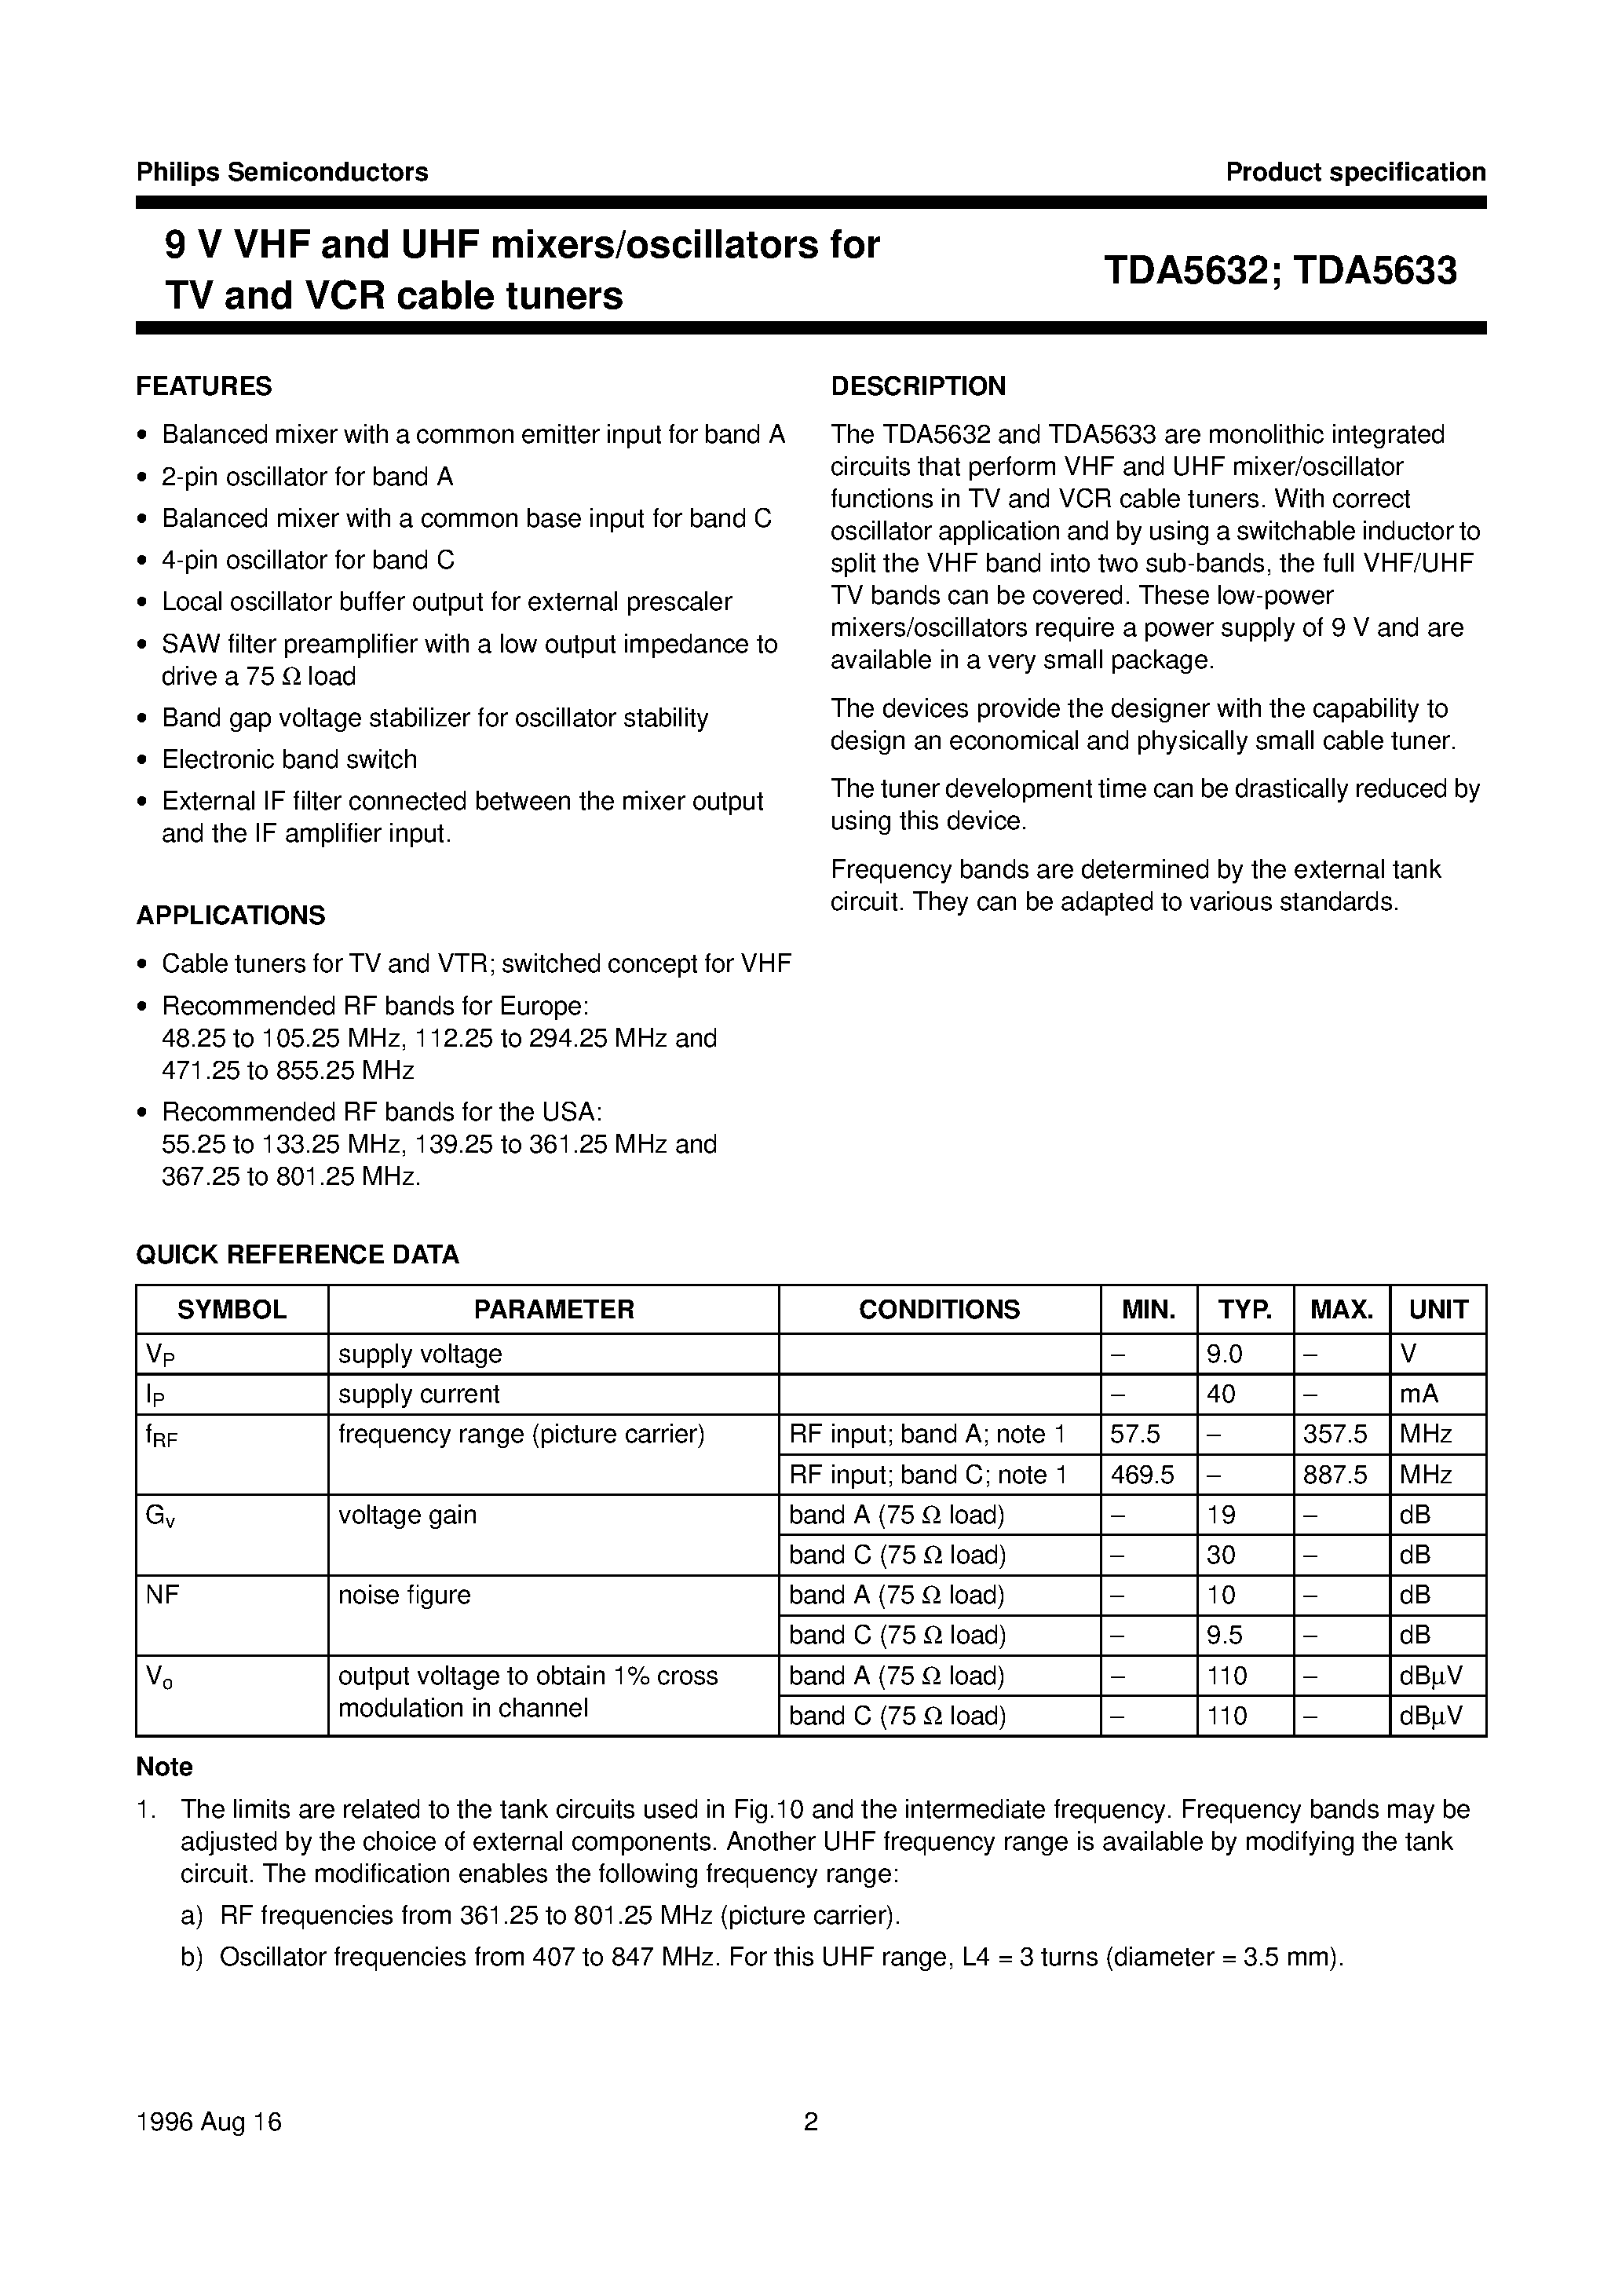 Datasheet TDA5633 - 9 V VHF and UHF mixers/oscillators for TV and VCR cable tuners page 2